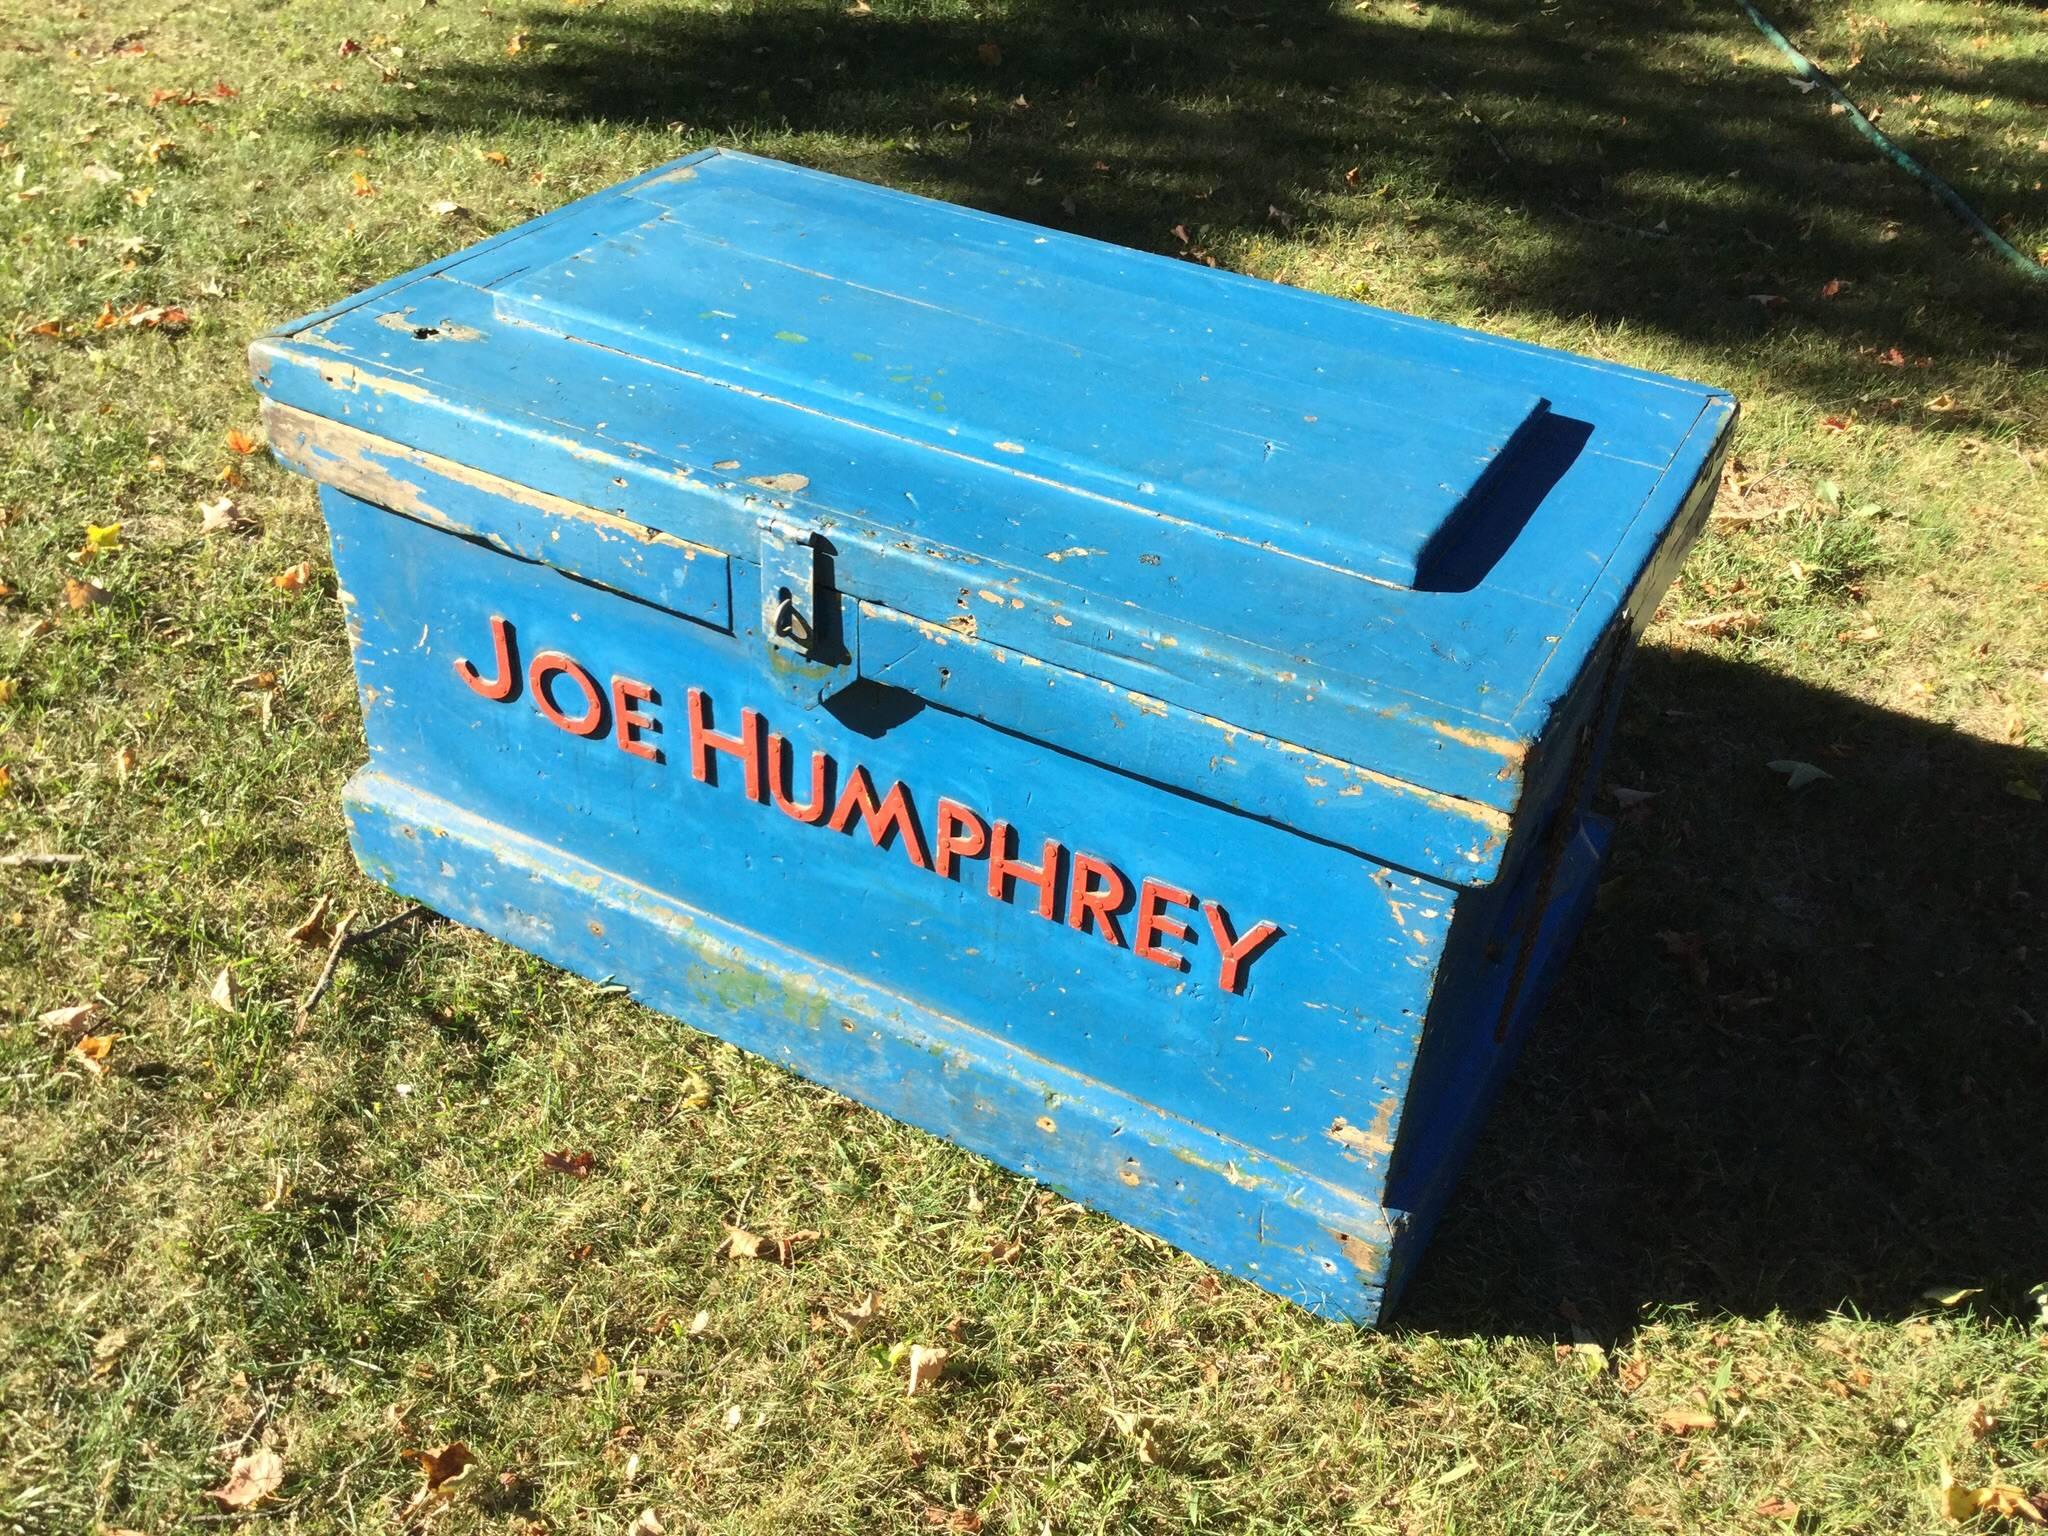 A great chest to store your possessions. Memorabilia, collectibles, games, toys, whatever. A great blue color with the raised red lettering that really pops. A nice Americana chest.